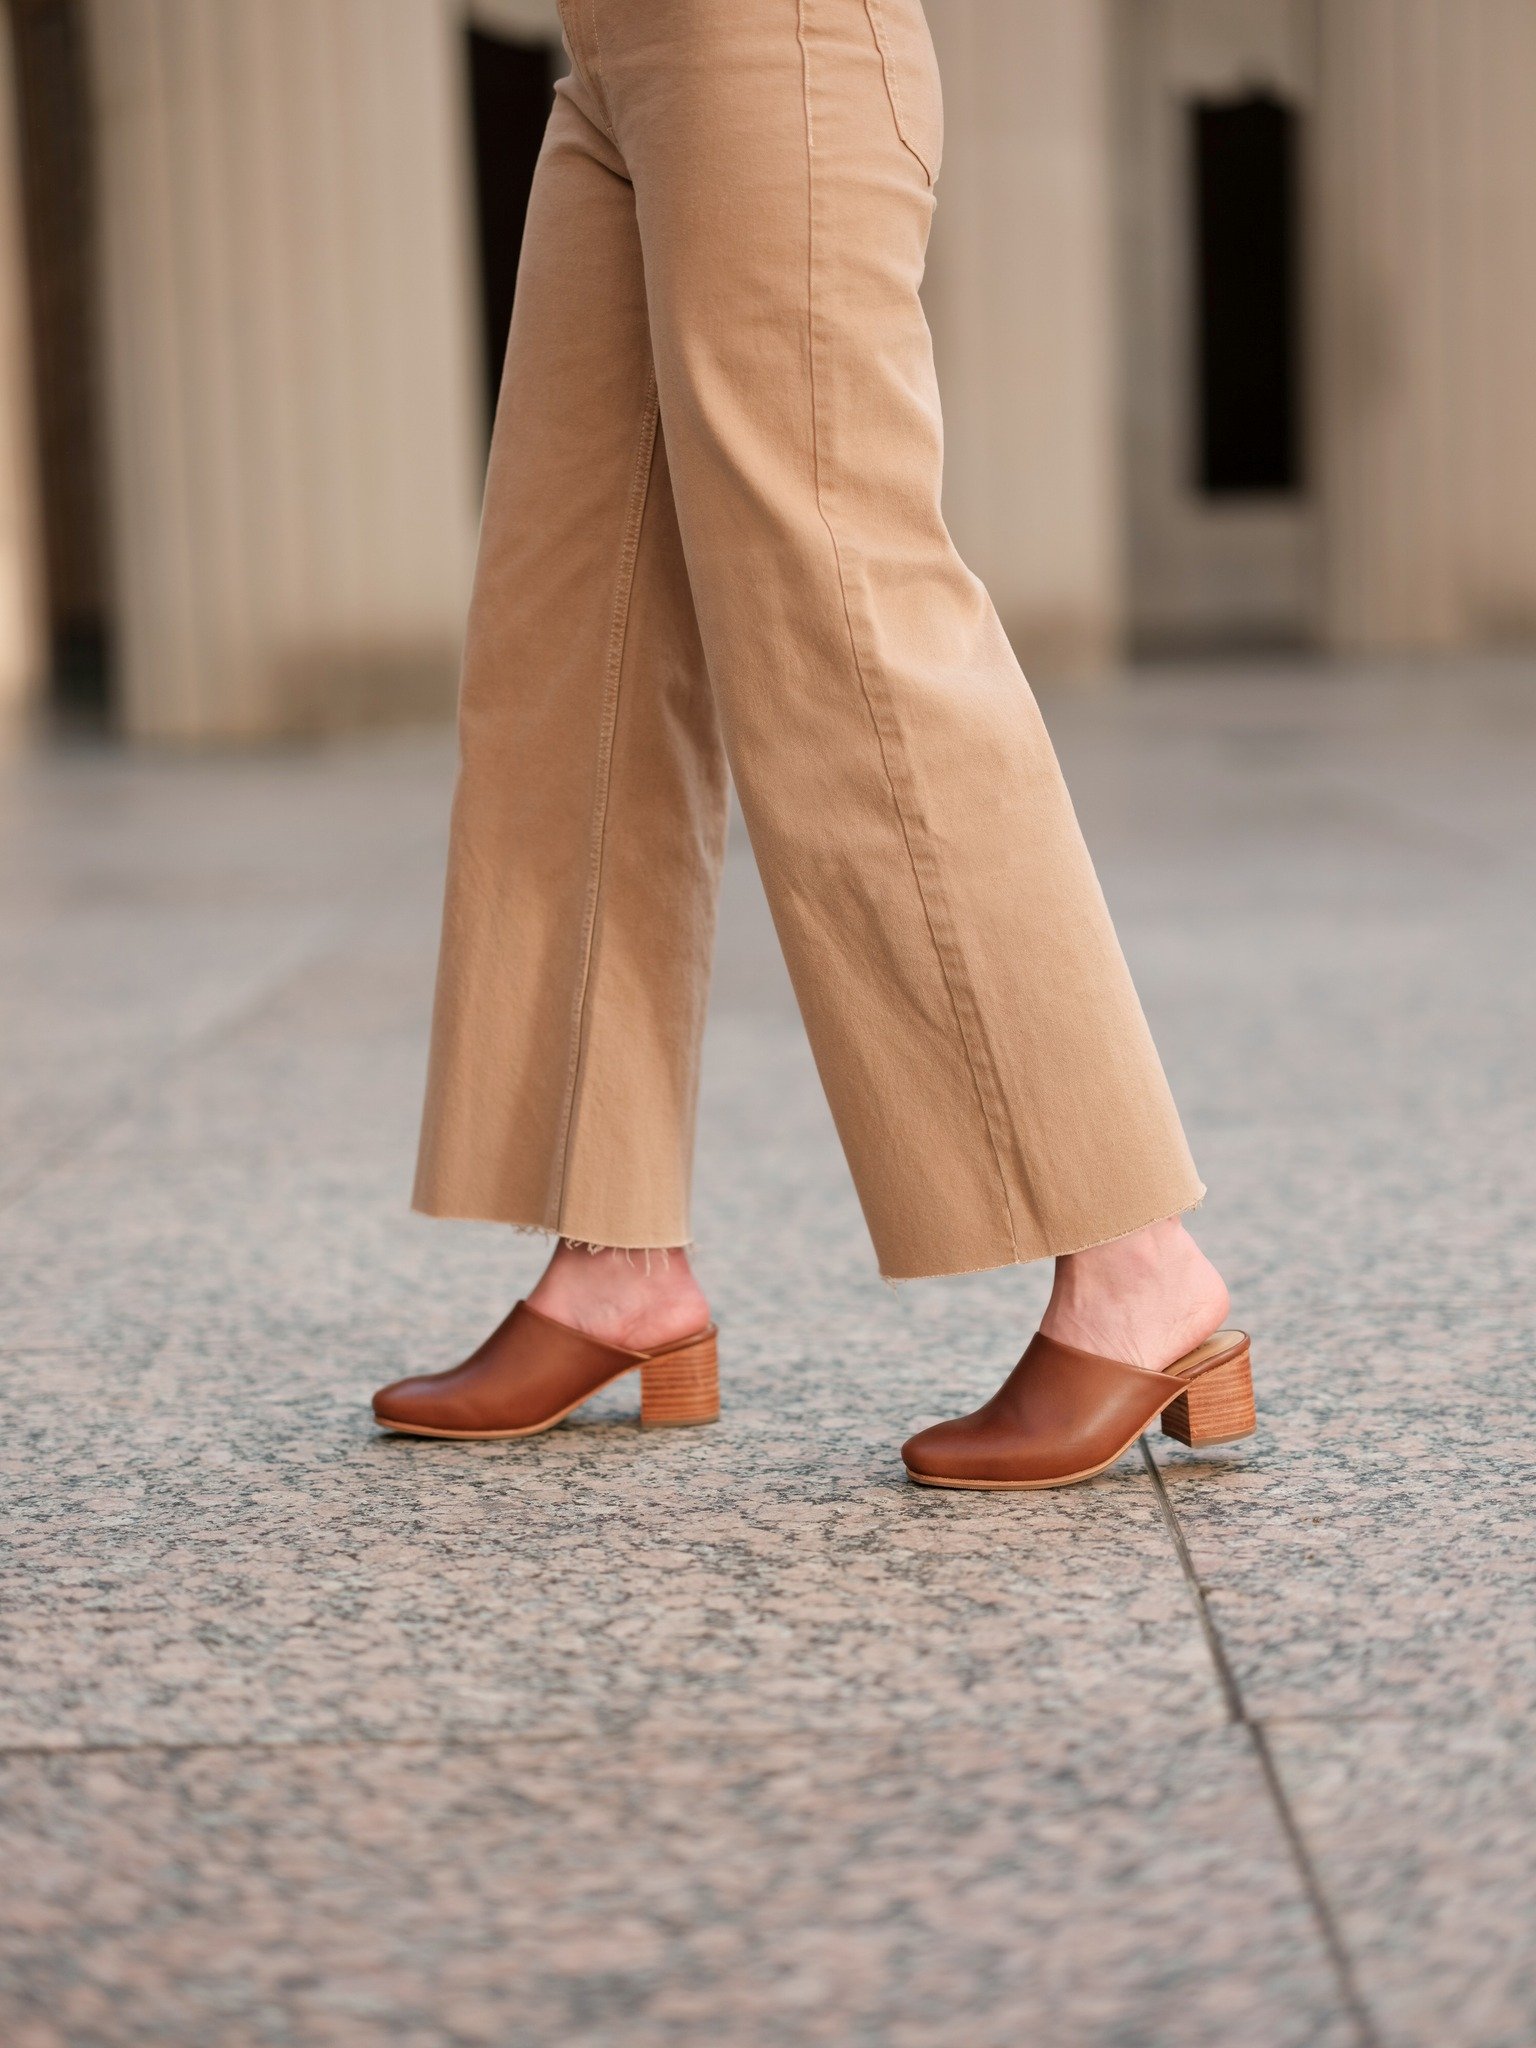 17 Sustainable Shoe Brands For Women to Last You Season after Season —  Sustainably Chic